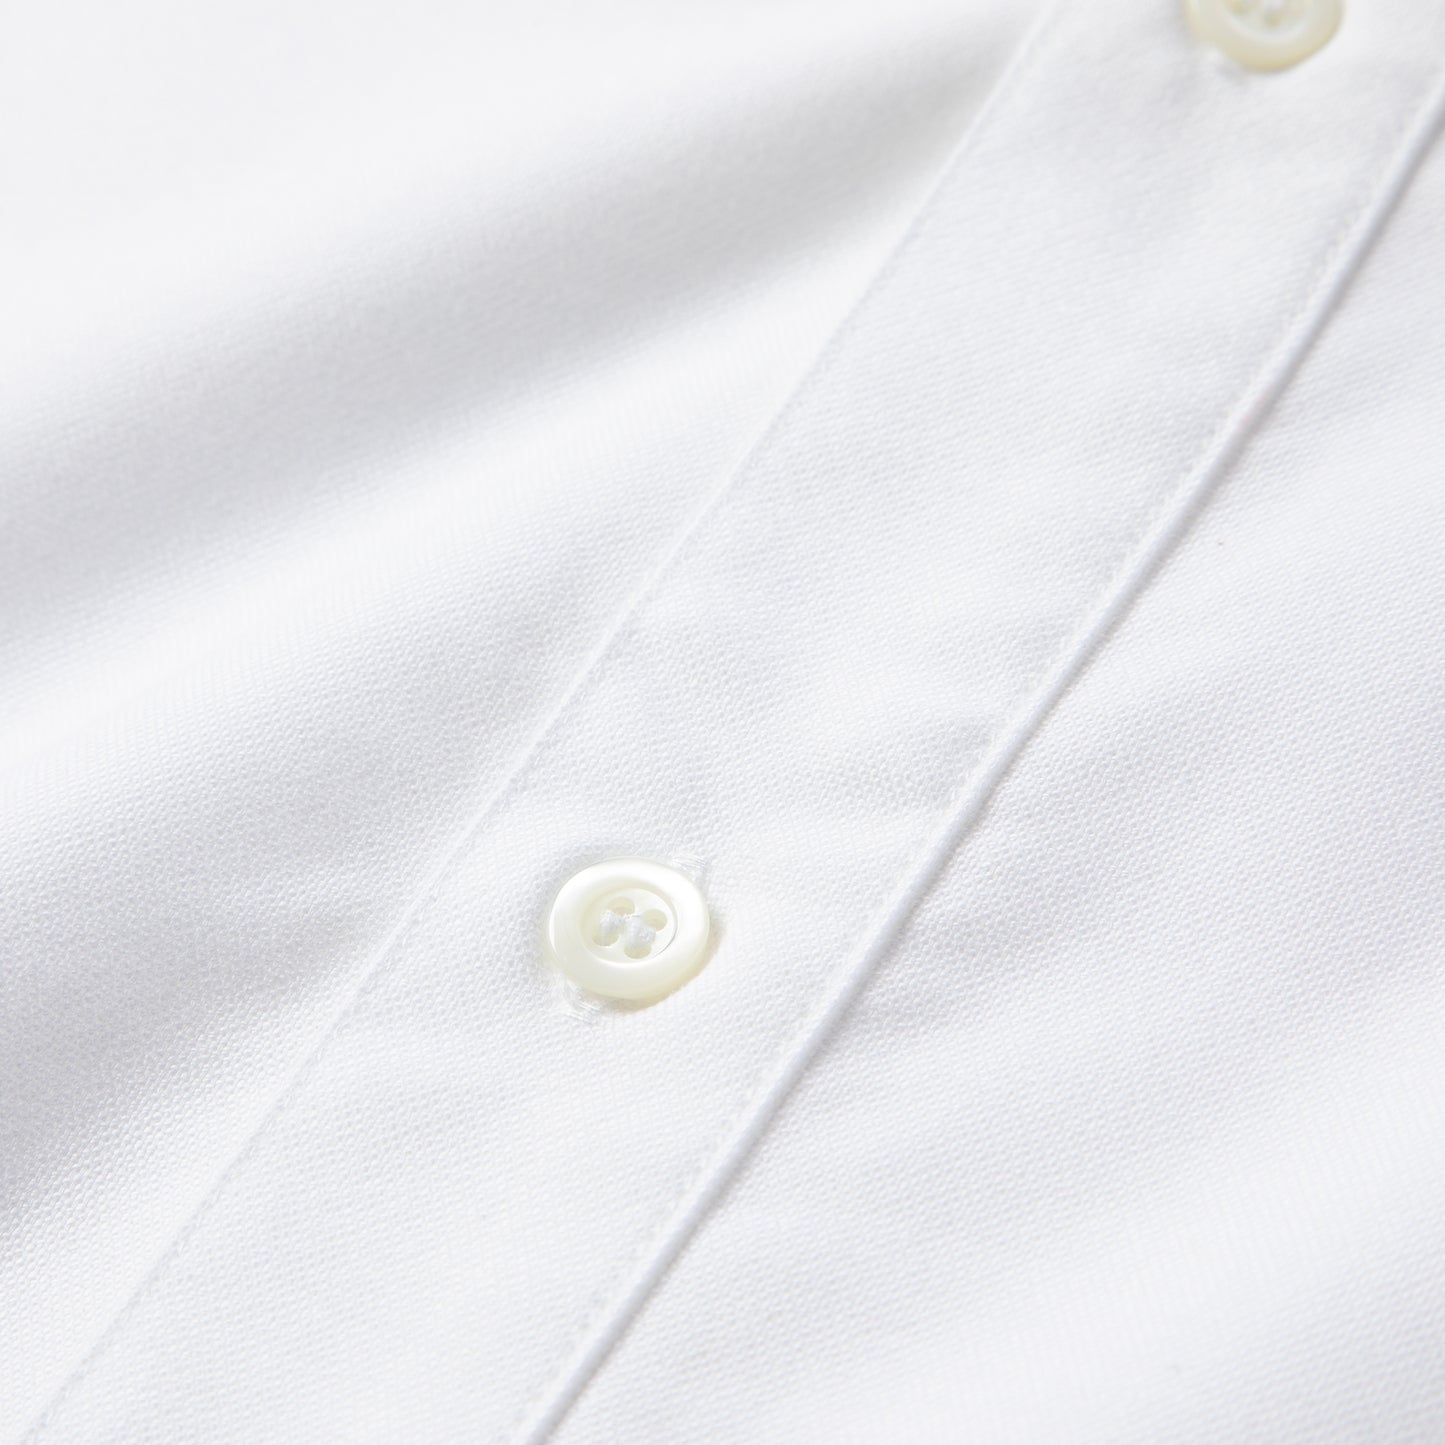 A.P.C. Chemise New Button Down (White)